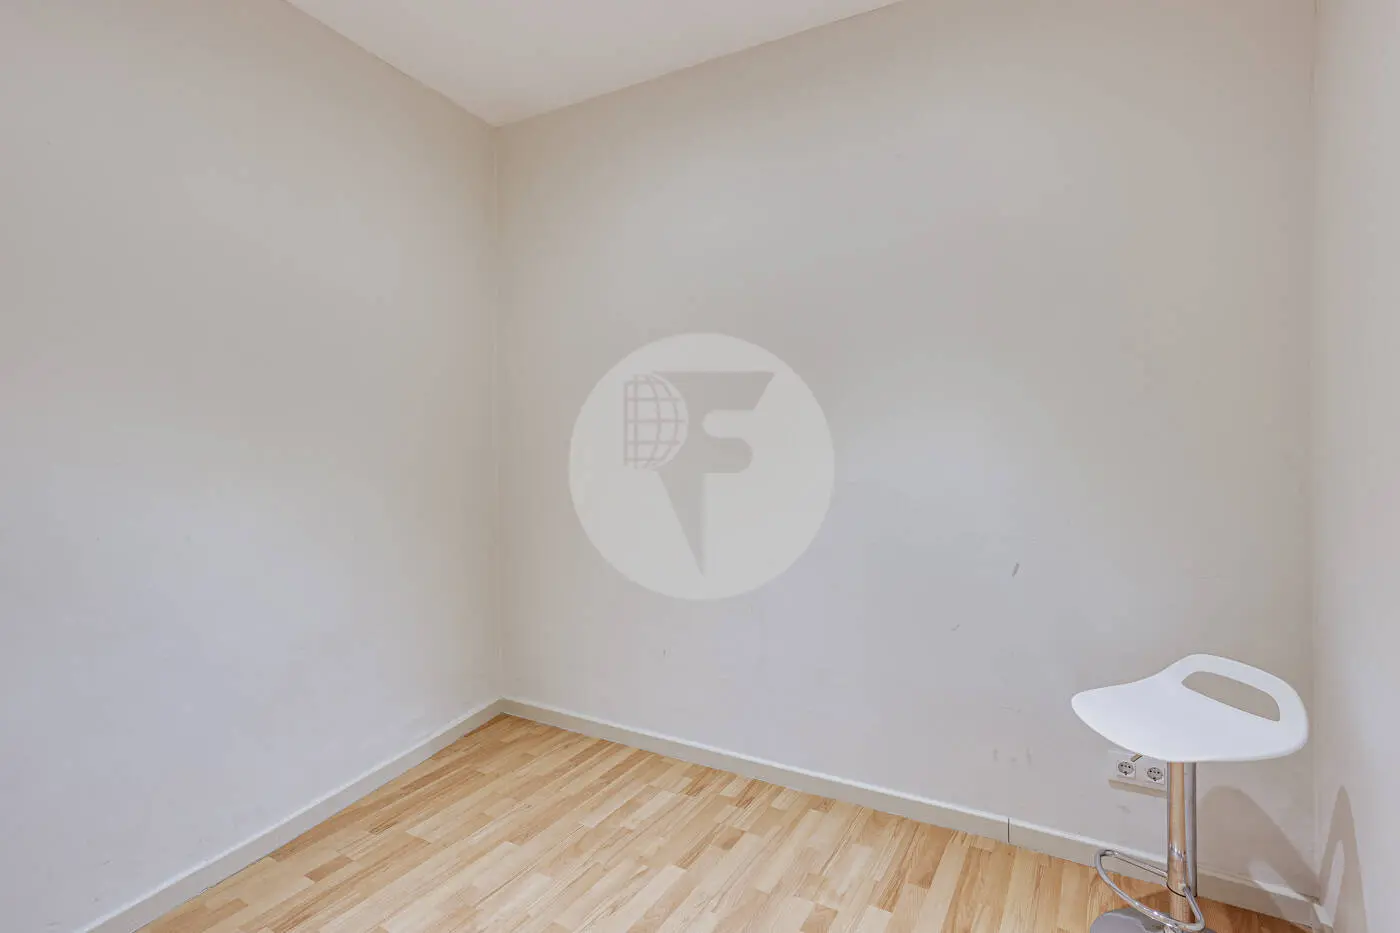 Magnificent apartment for sale next to Pl Universitat of 114m2 according to the land registry, located on Tallers Street in the Ciutat Vella neighborhood of Barcelona 14